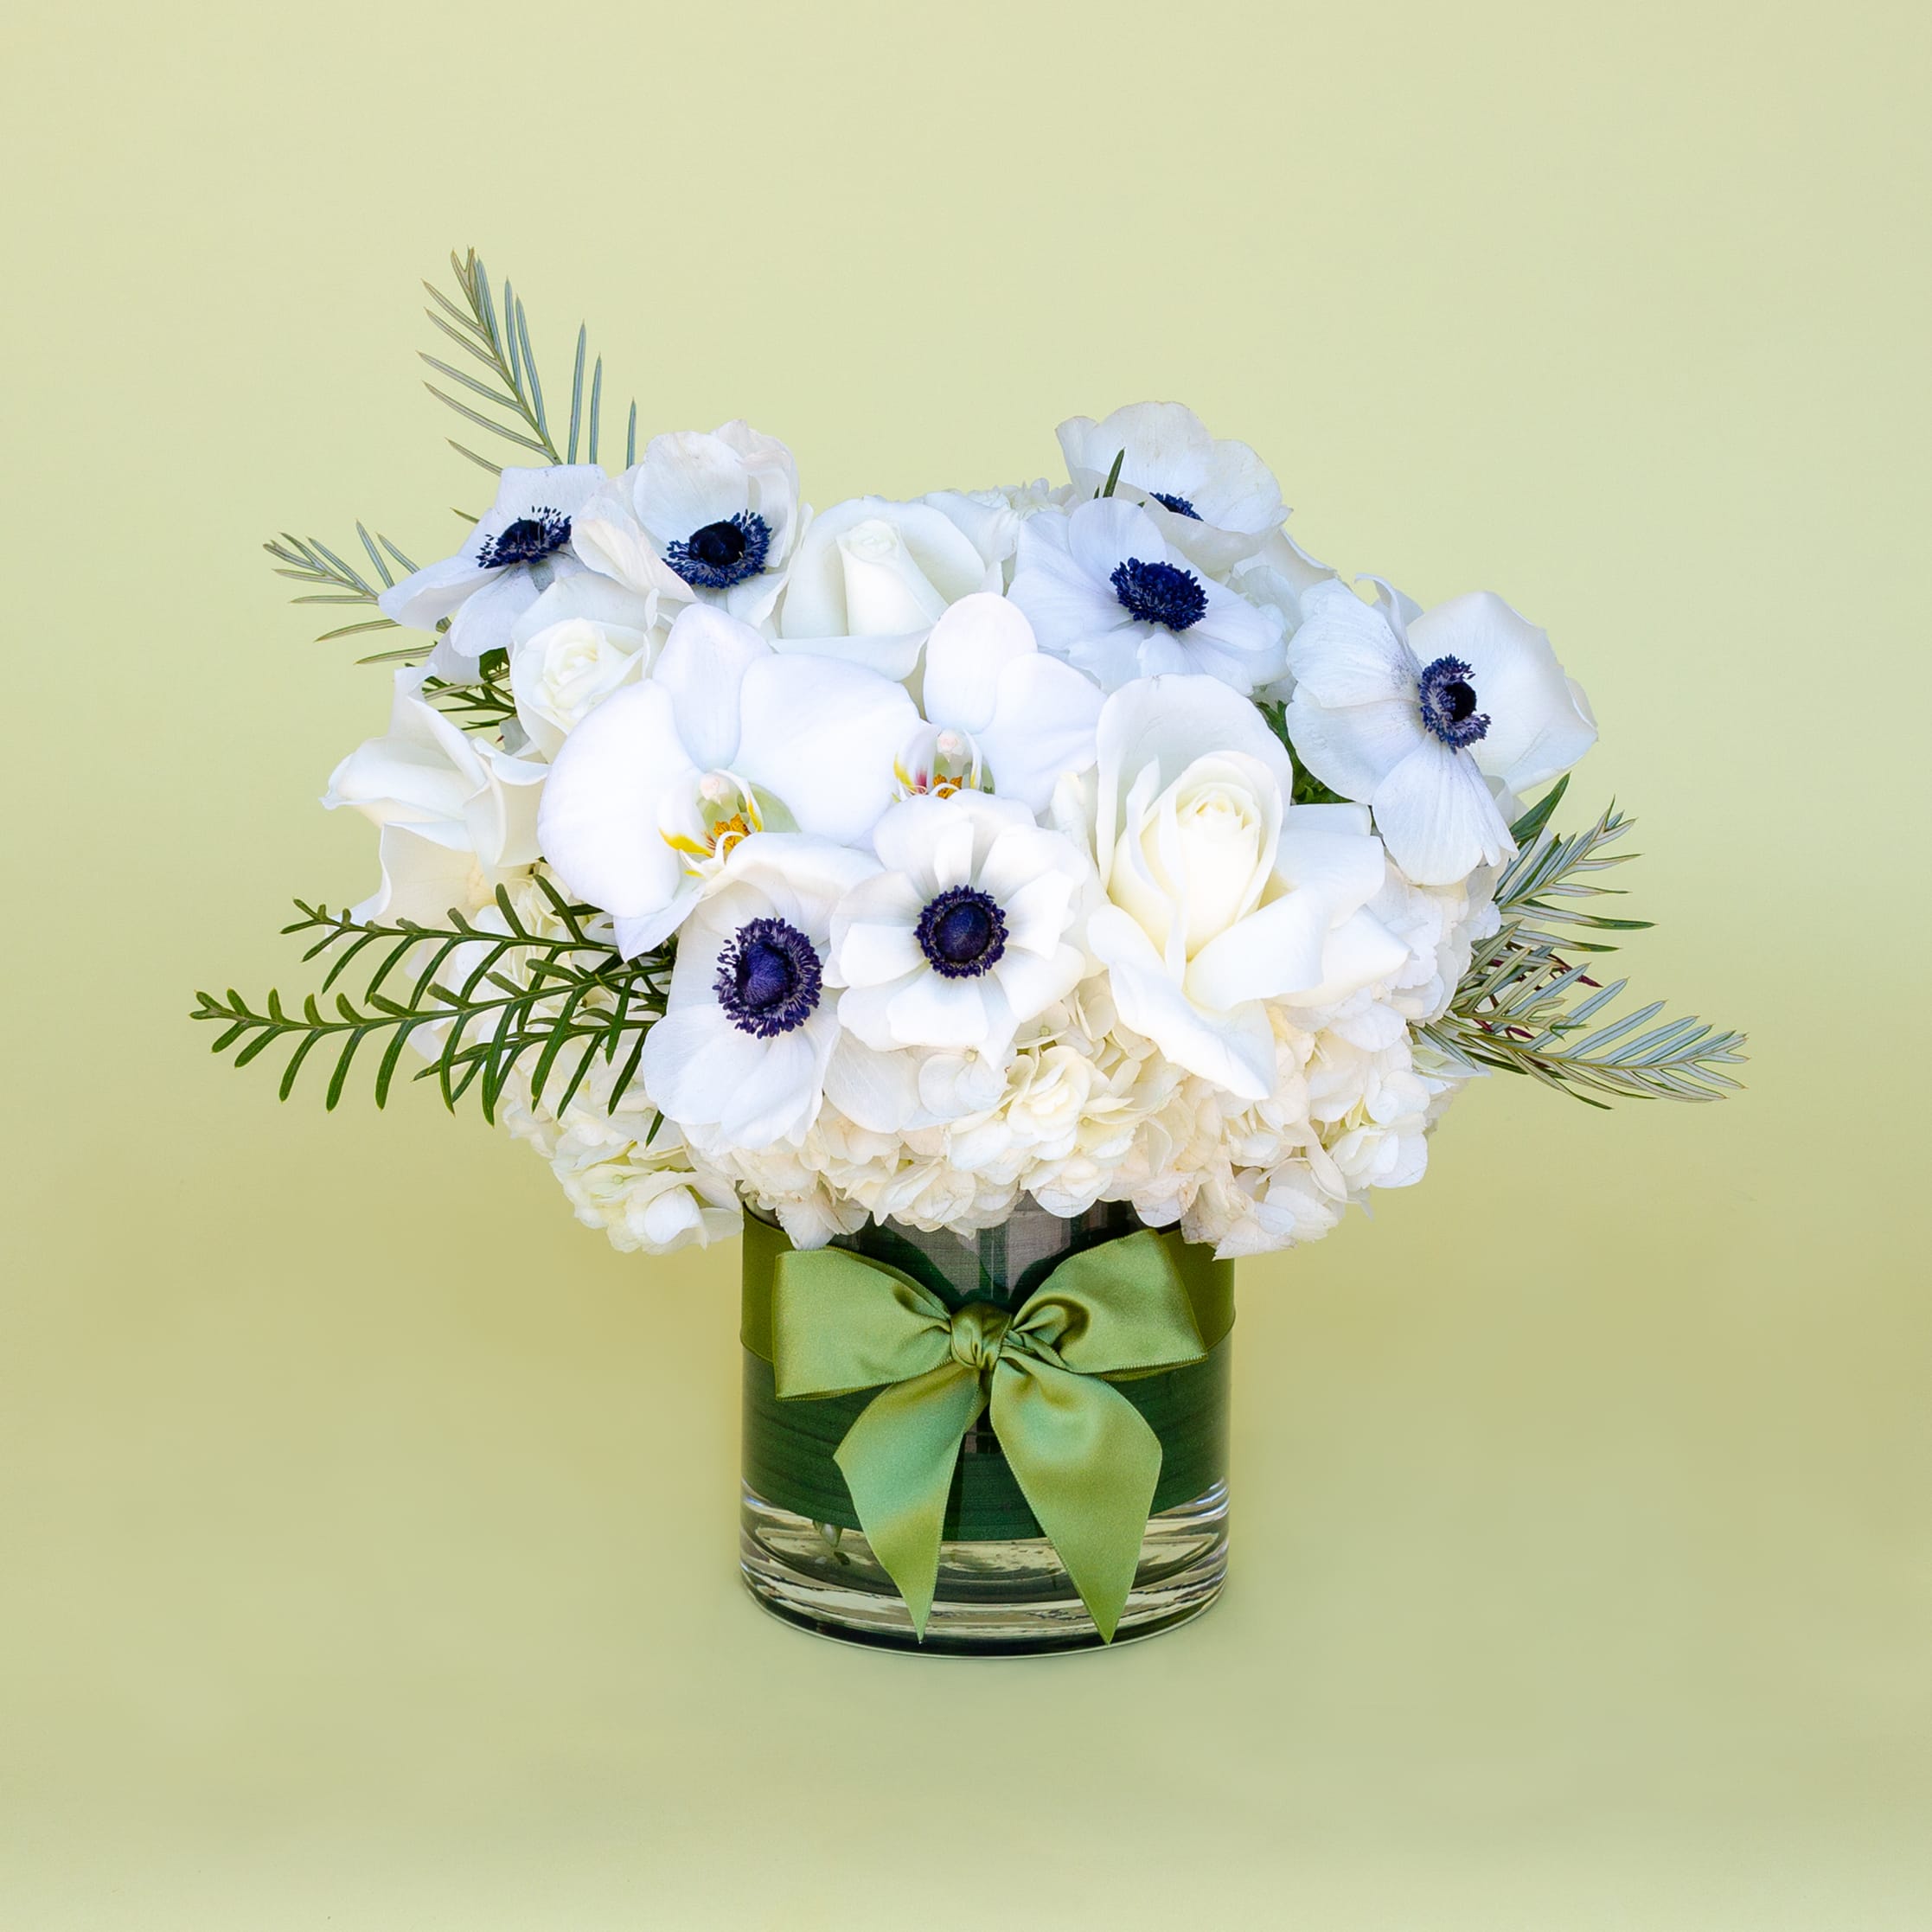  Marshmallow Cocoa - Clean and fresh this white and green premium floral arrangement is perfect for your mom! This arrangement may include hydrangea, roses, anemones, and other beautifully toned elements.